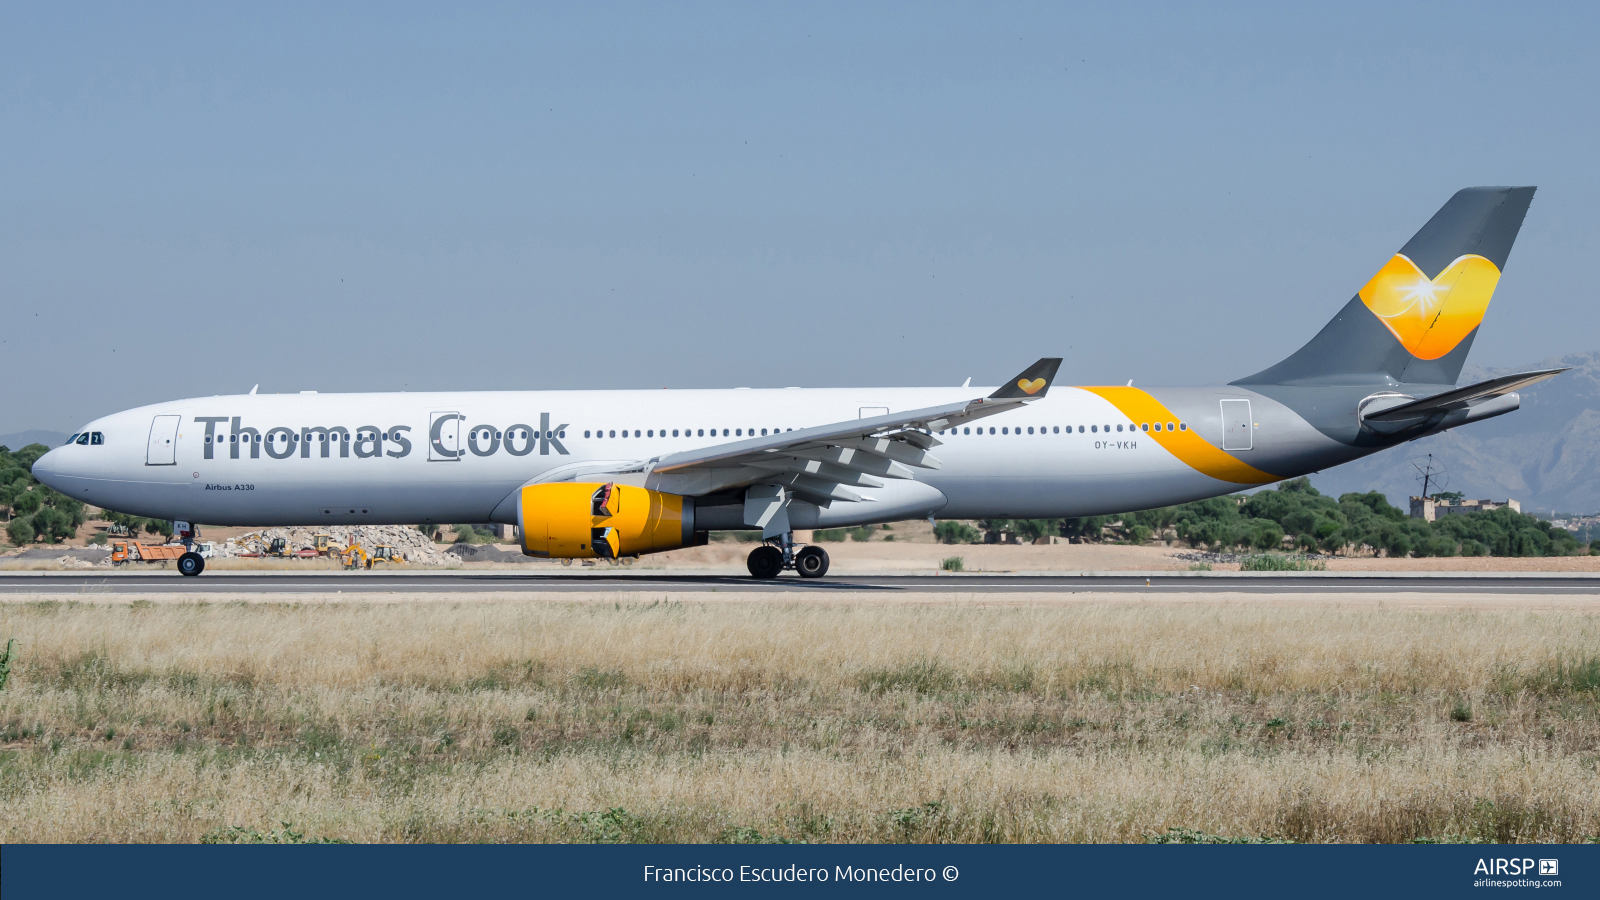 Thomas Cook Airlines  Airbus A330-300  OY-VKH